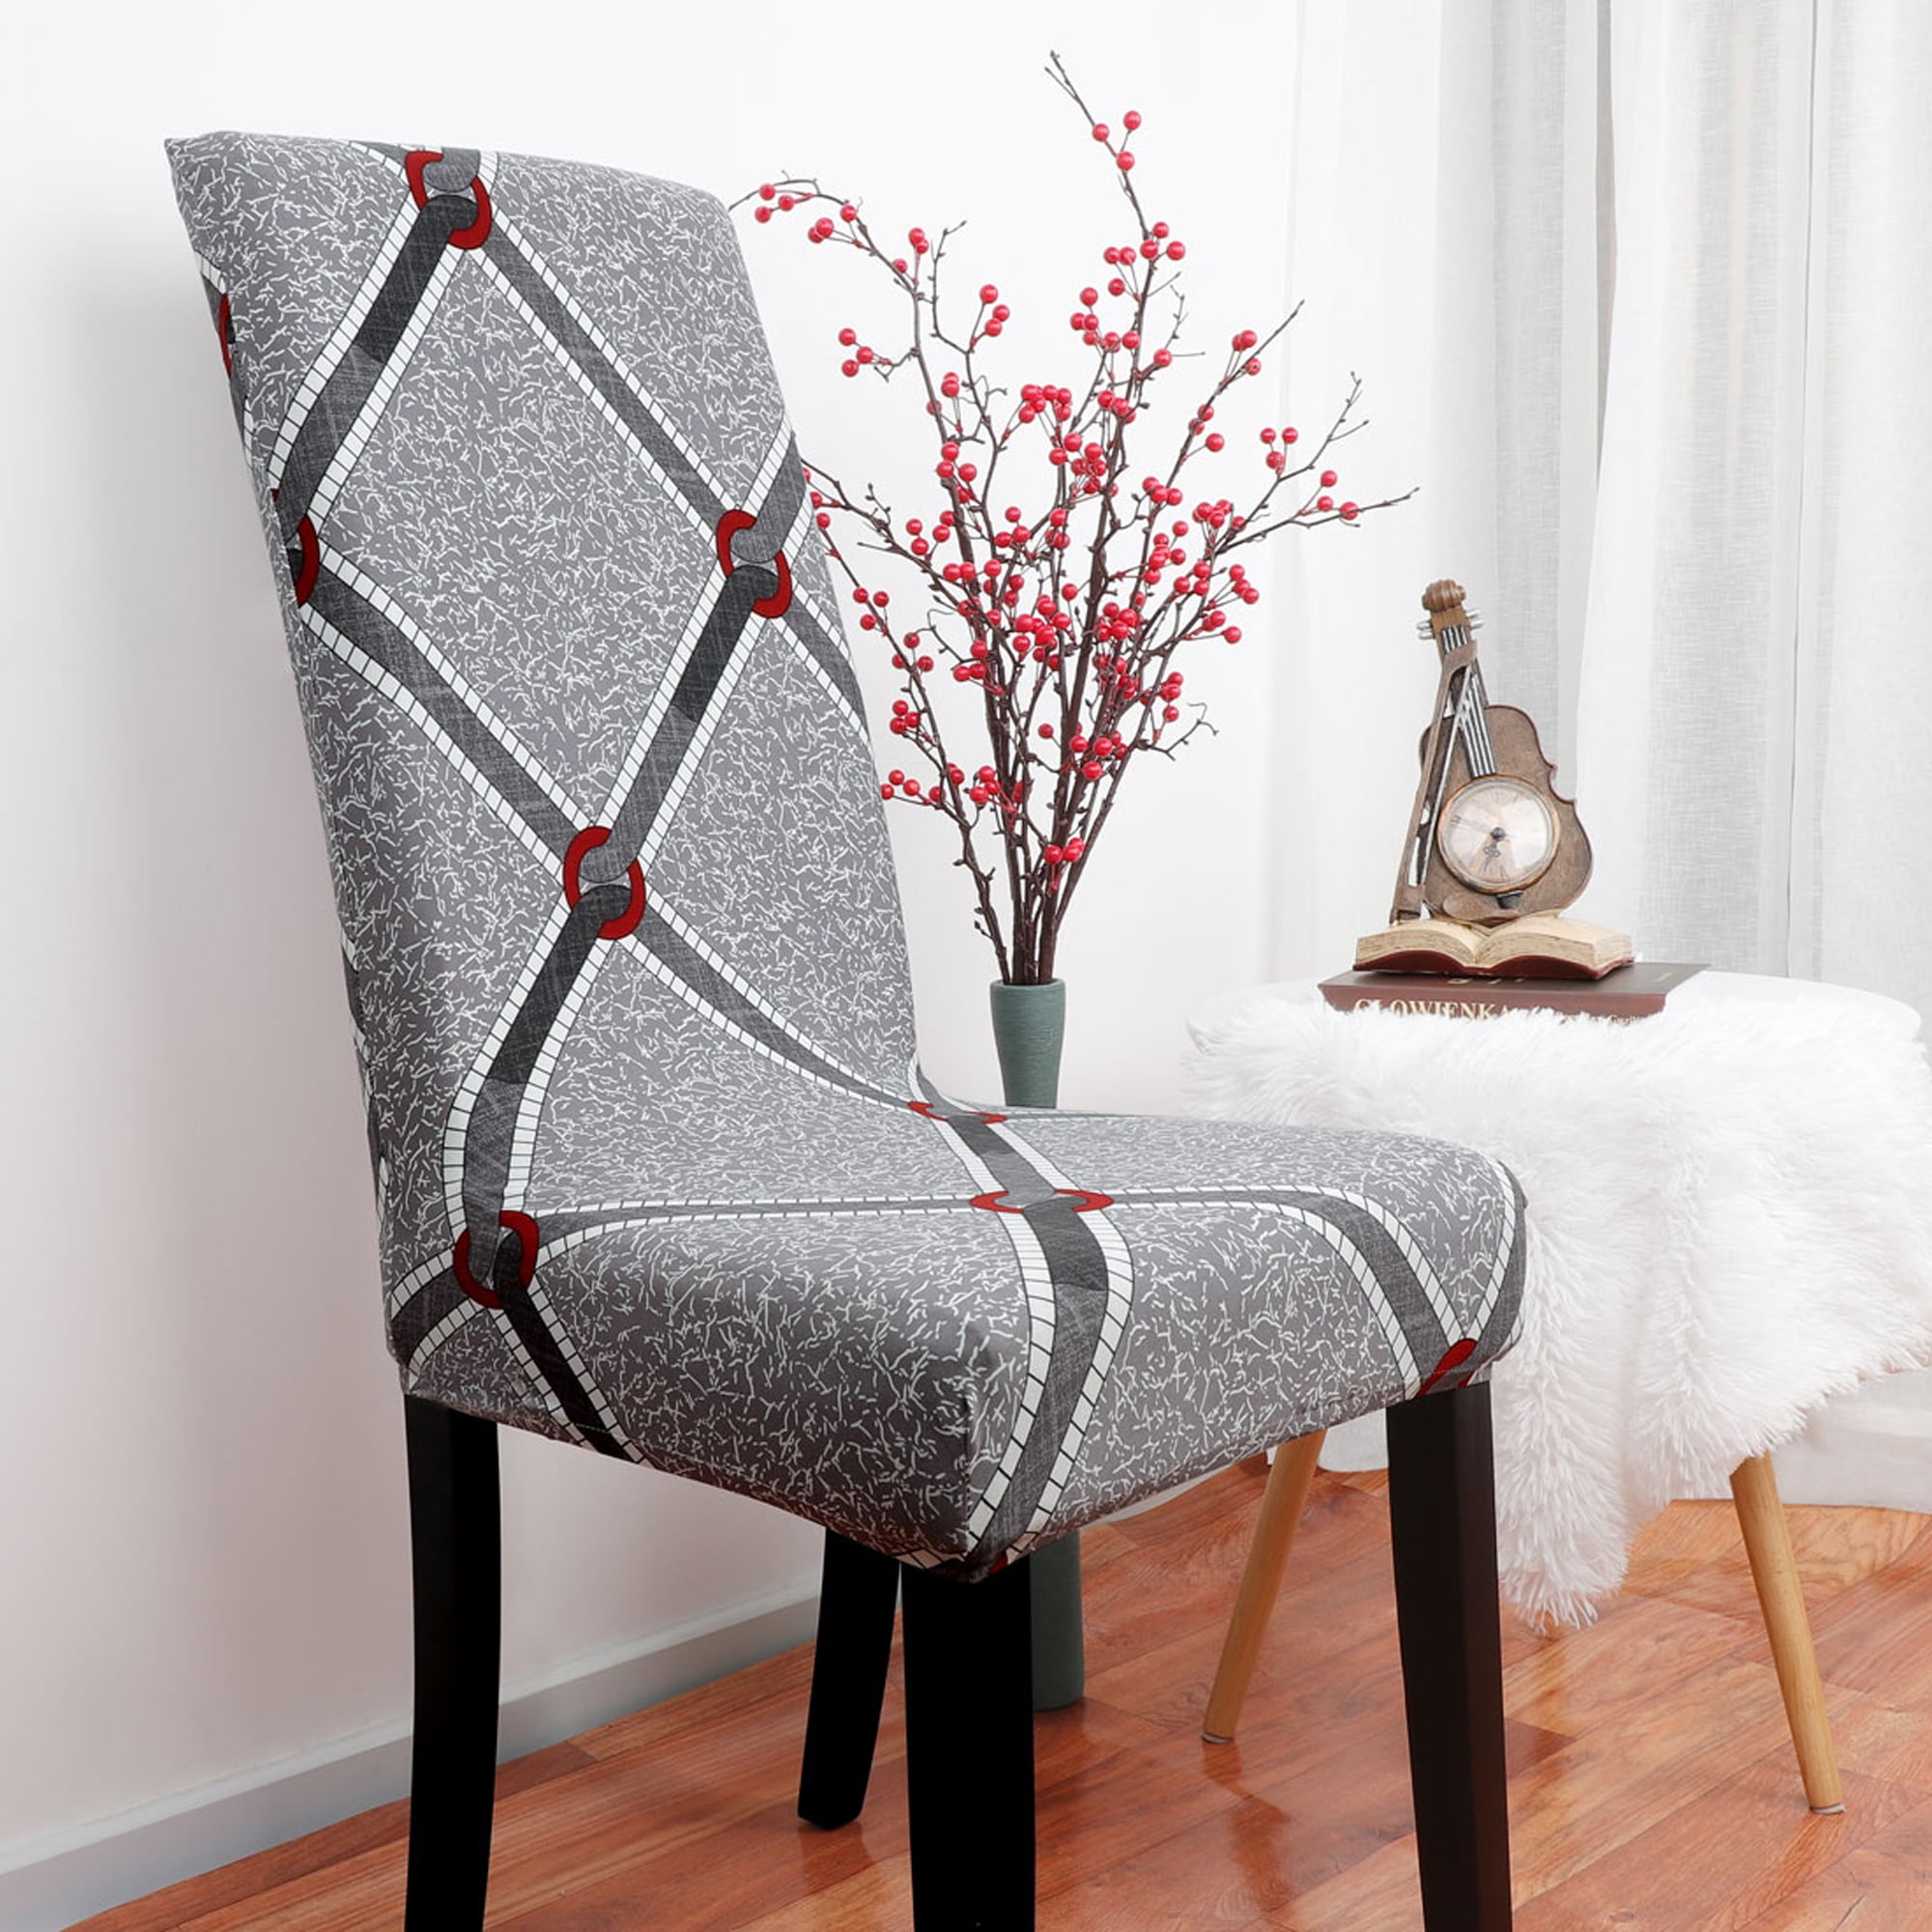 Details about   new Crushed Velvet Dining Chair Covers Stretchable Christmas Slipcover Decor 